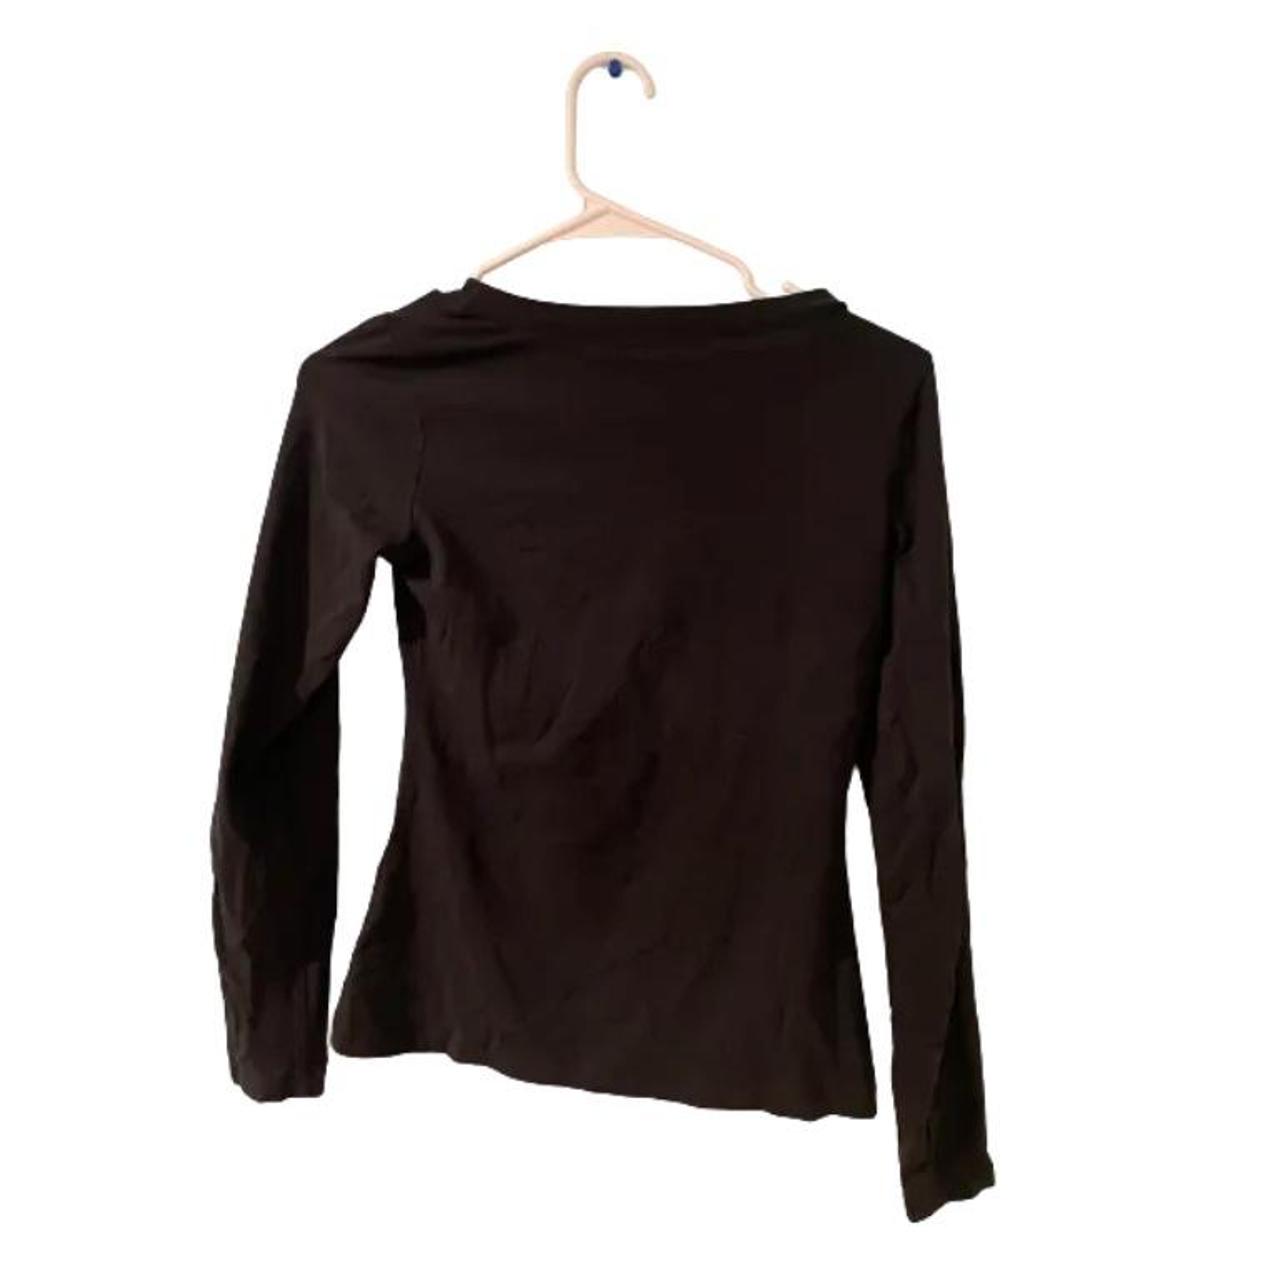 Product Image 2 - Look at this Galliano top..